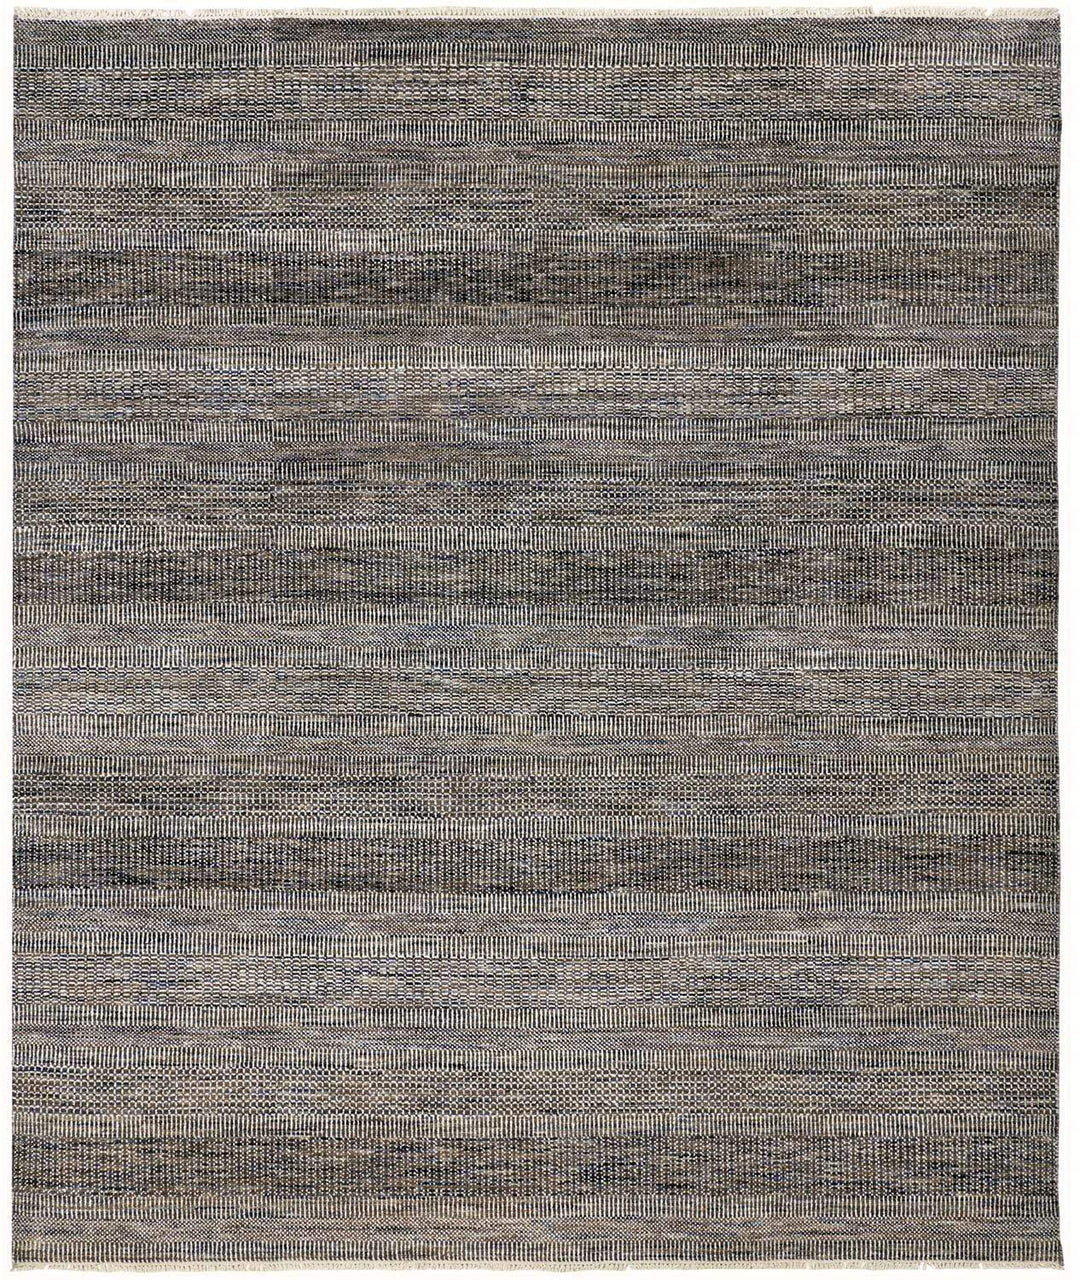 Feizy Feizy Janson Classic Striped Rug - Dark & Warm Gray - Available in 8 Sizes 5'-6" x 8'-6" I92I6065DGY000E50